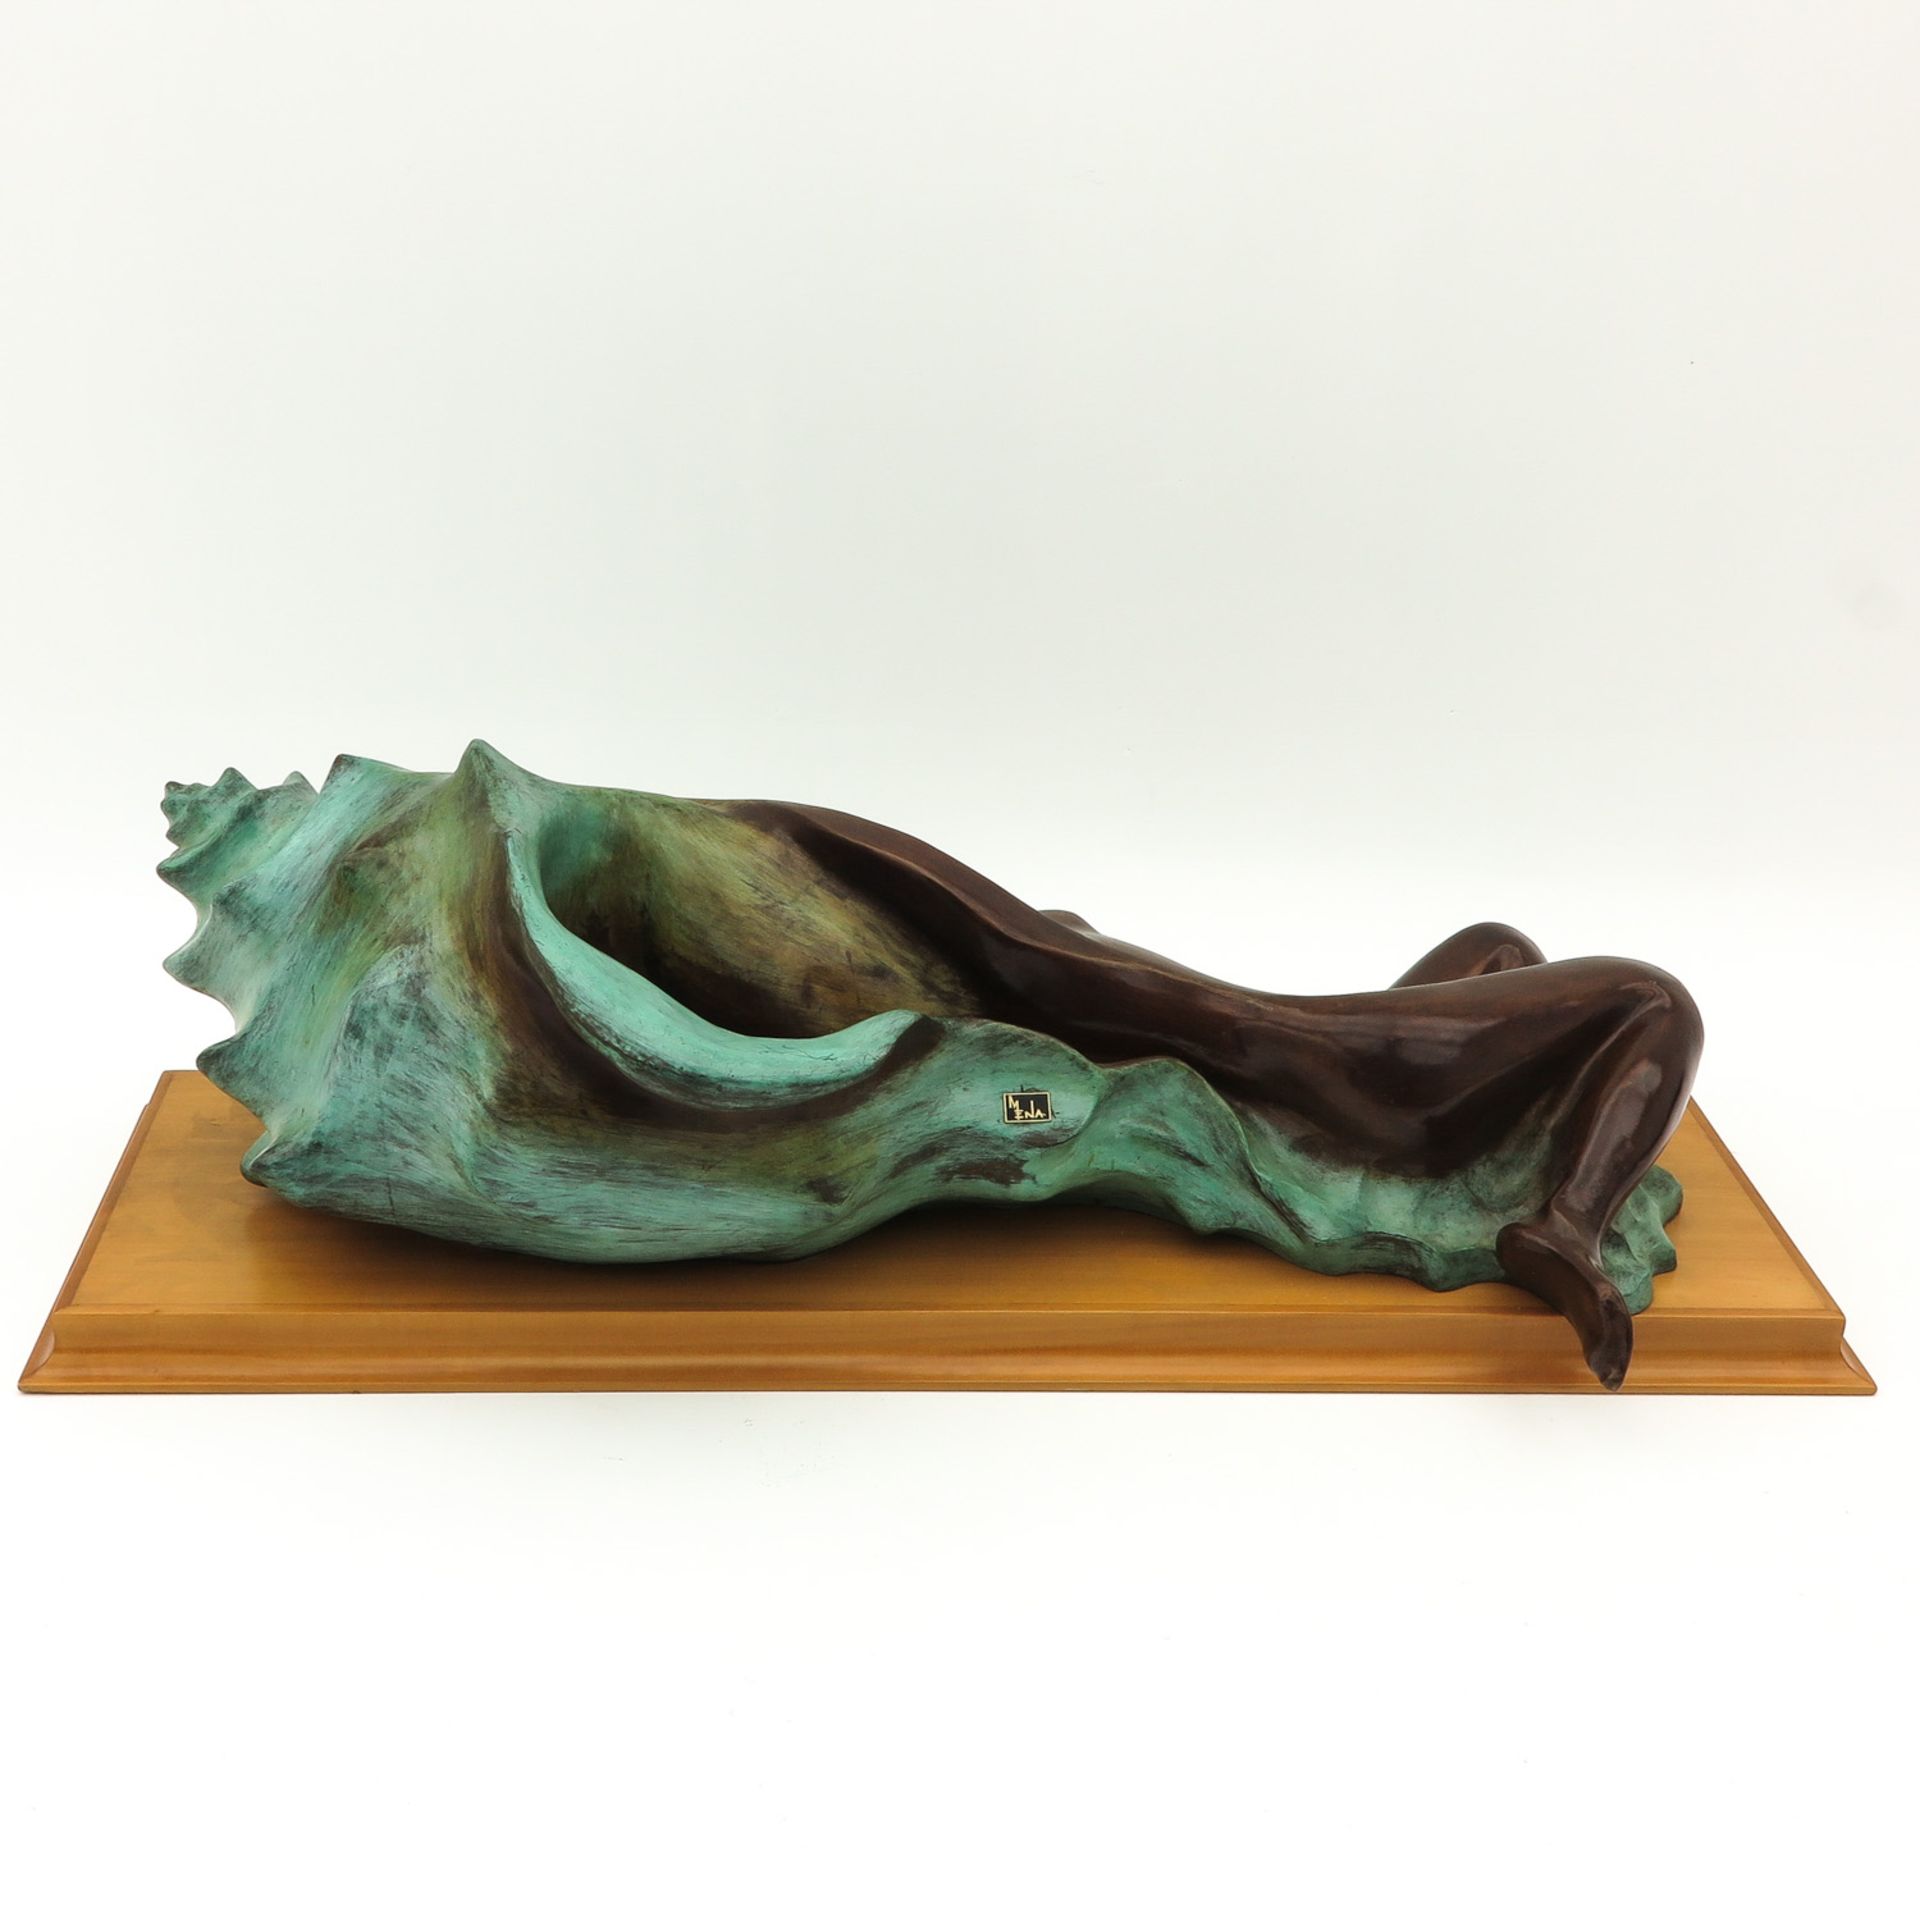 A Bronze Sculpture of Lady and Shell - Image 3 of 5